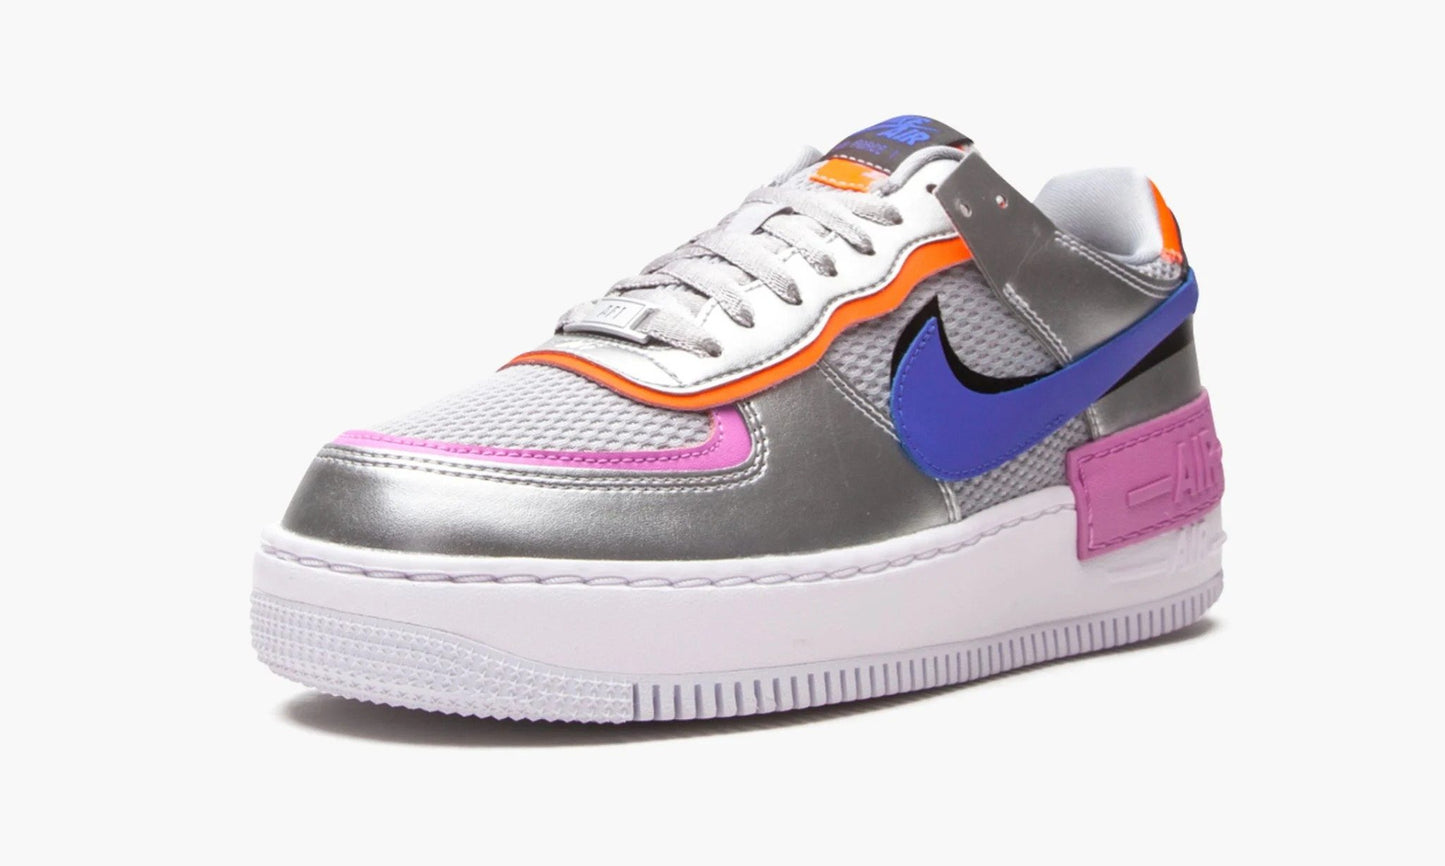 Force 1 Low Shadow WMNS “Metallic Silver”